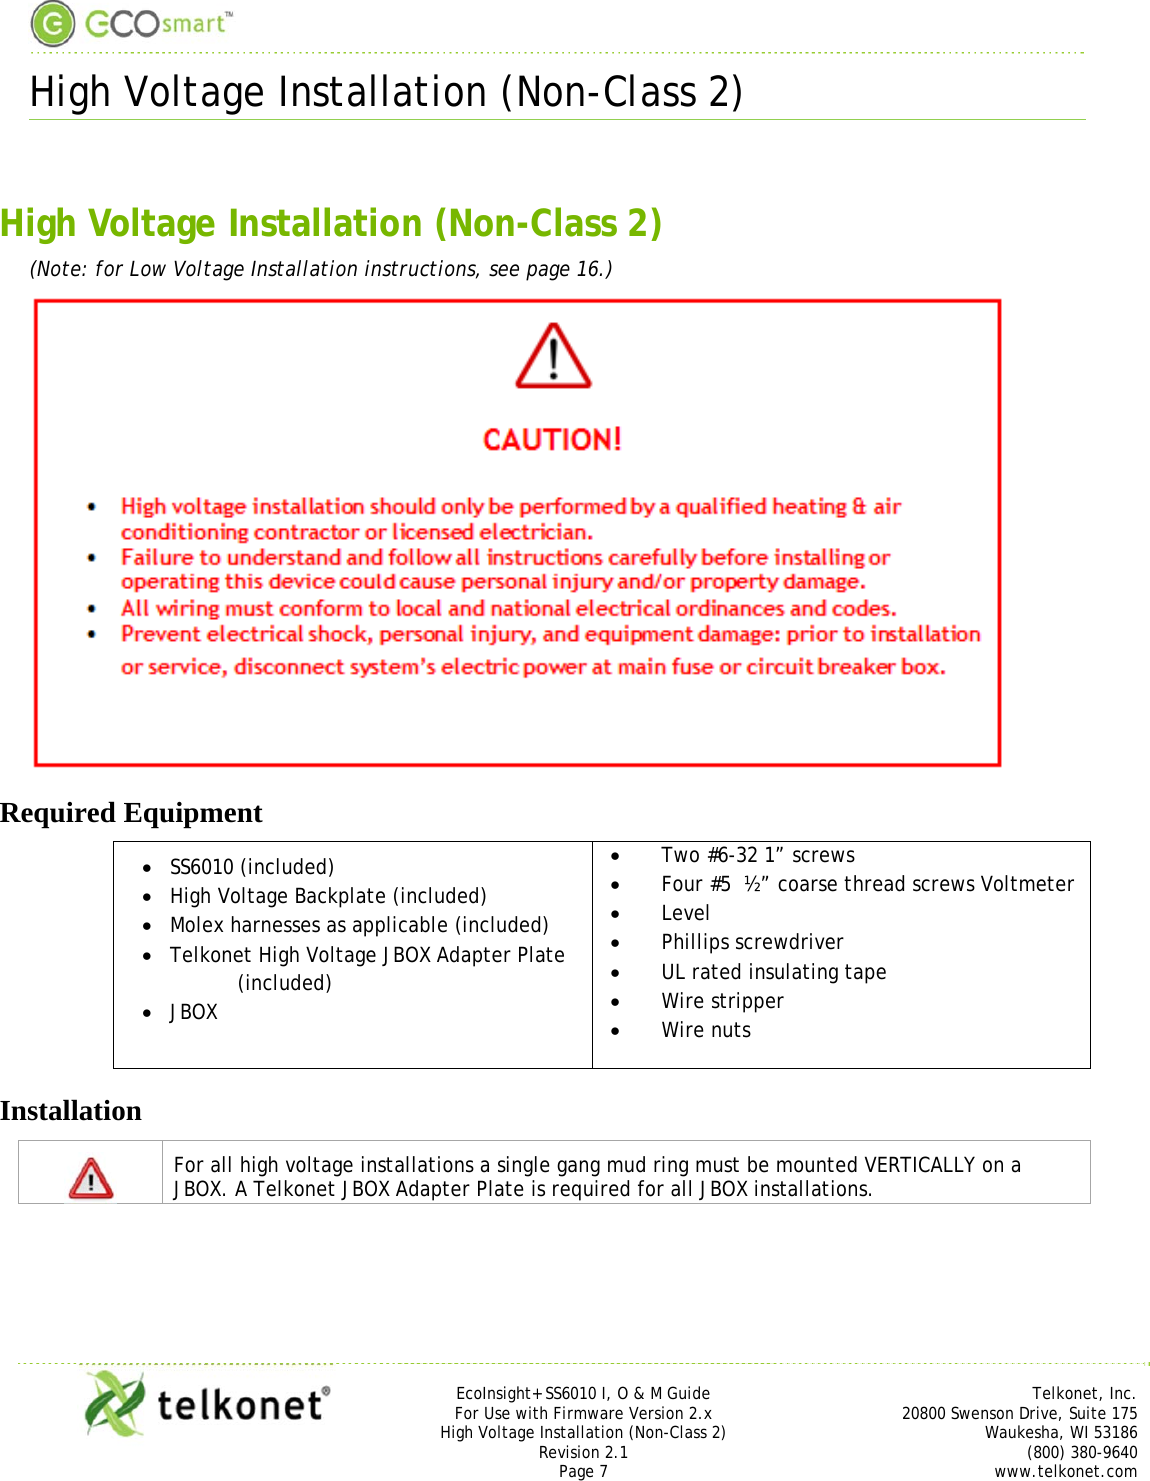  High Voltage Installation (Non-Class 2)     EcoInsight+ SS6010 I, O &amp; M Guide Telkonet, Inc. For Use with Firmware Version 2.x 20800 Swenson Drive, Suite 175 High Voltage Installation (Non-Class 2) Waukesha, WI 53186 Revision 2.1 (800) 380-9640 Page 7 www.telkonet.com   High Voltage Installation (Non-Class 2) (Note: for Low Voltage Installation instructions, see page 16.)  Required Equipment  SS6010 (included)  High Voltage Backplate (included)  Molex harnesses as applicable (included)  Telkonet High Voltage JBOX Adapter Plate (included)  JBOX   Two #6-32 1” screws  Four #5  ½” coarse thread screws Voltmeter   Level  Phillips screwdriver  UL rated insulating tape  Wire stripper  Wire nuts Installation  For all high voltage installations a single gang mud ring must be mounted VERTICALLY on a JBOX. A Telkonet JBOX Adapter Plate is required for all JBOX installations.  